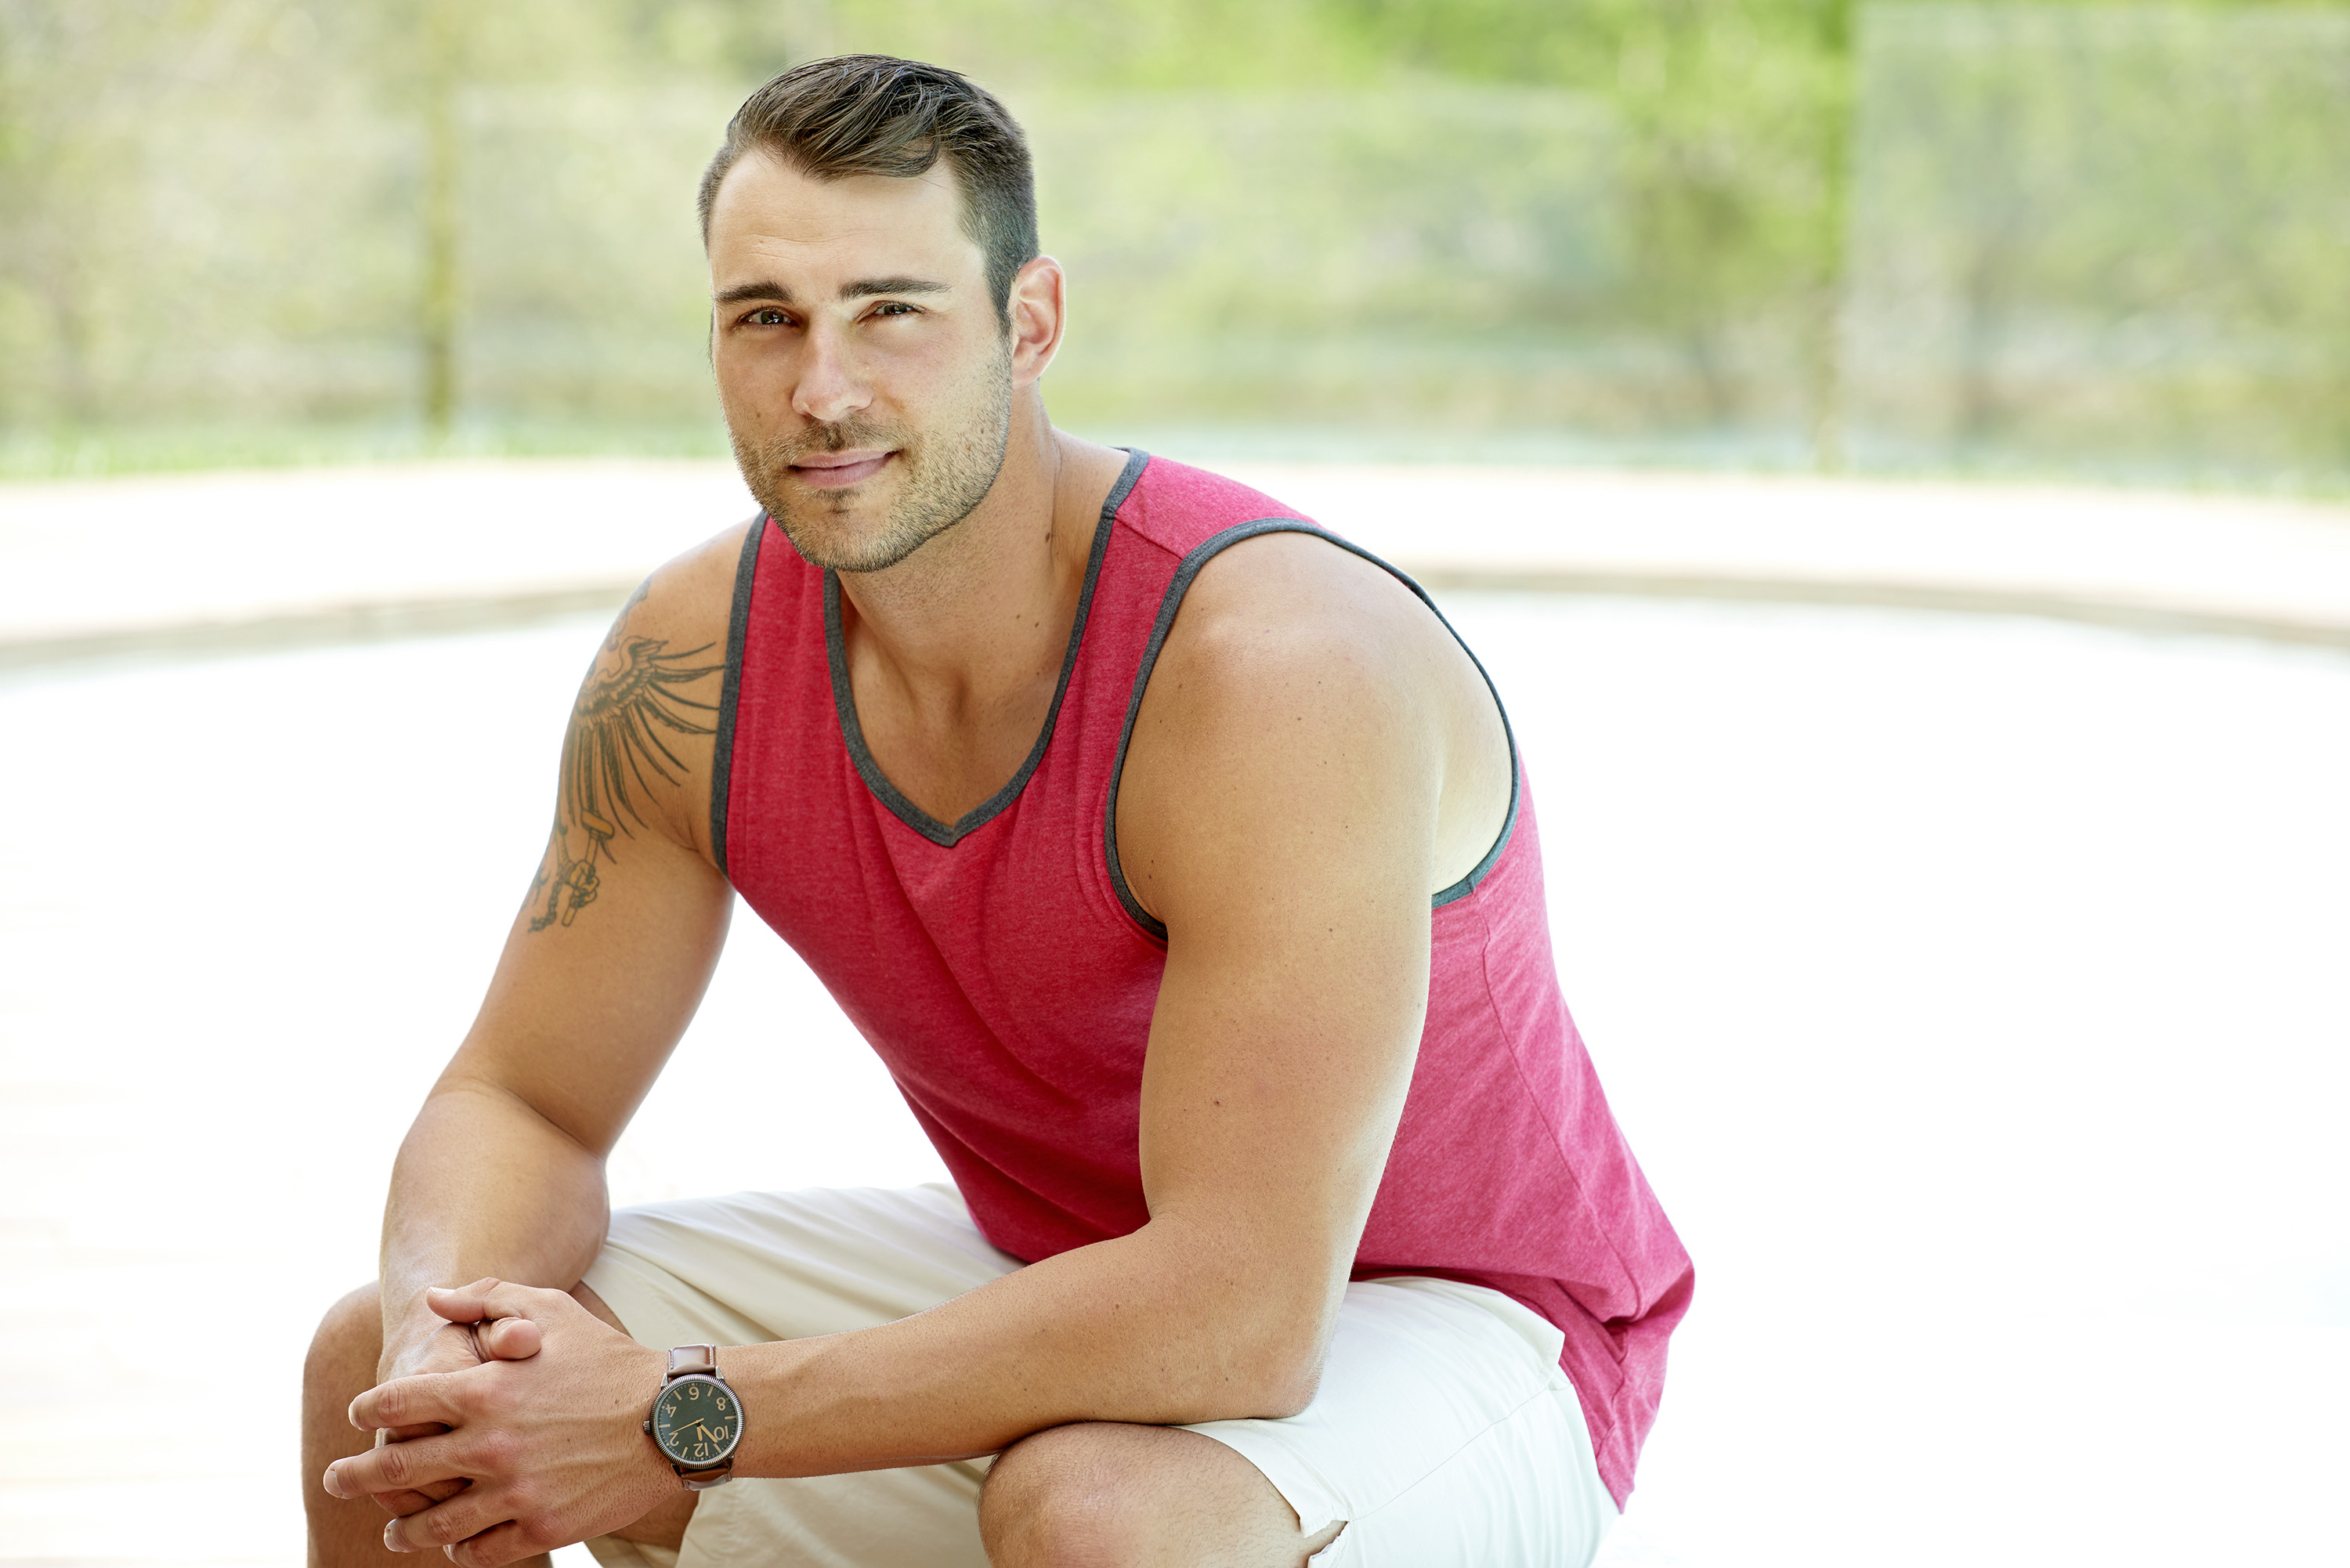 Ben Zorn Bachelor in Paradise,Contestant,Wiki,Bio,Age,Profile,Images,Girlfriend | Full Details